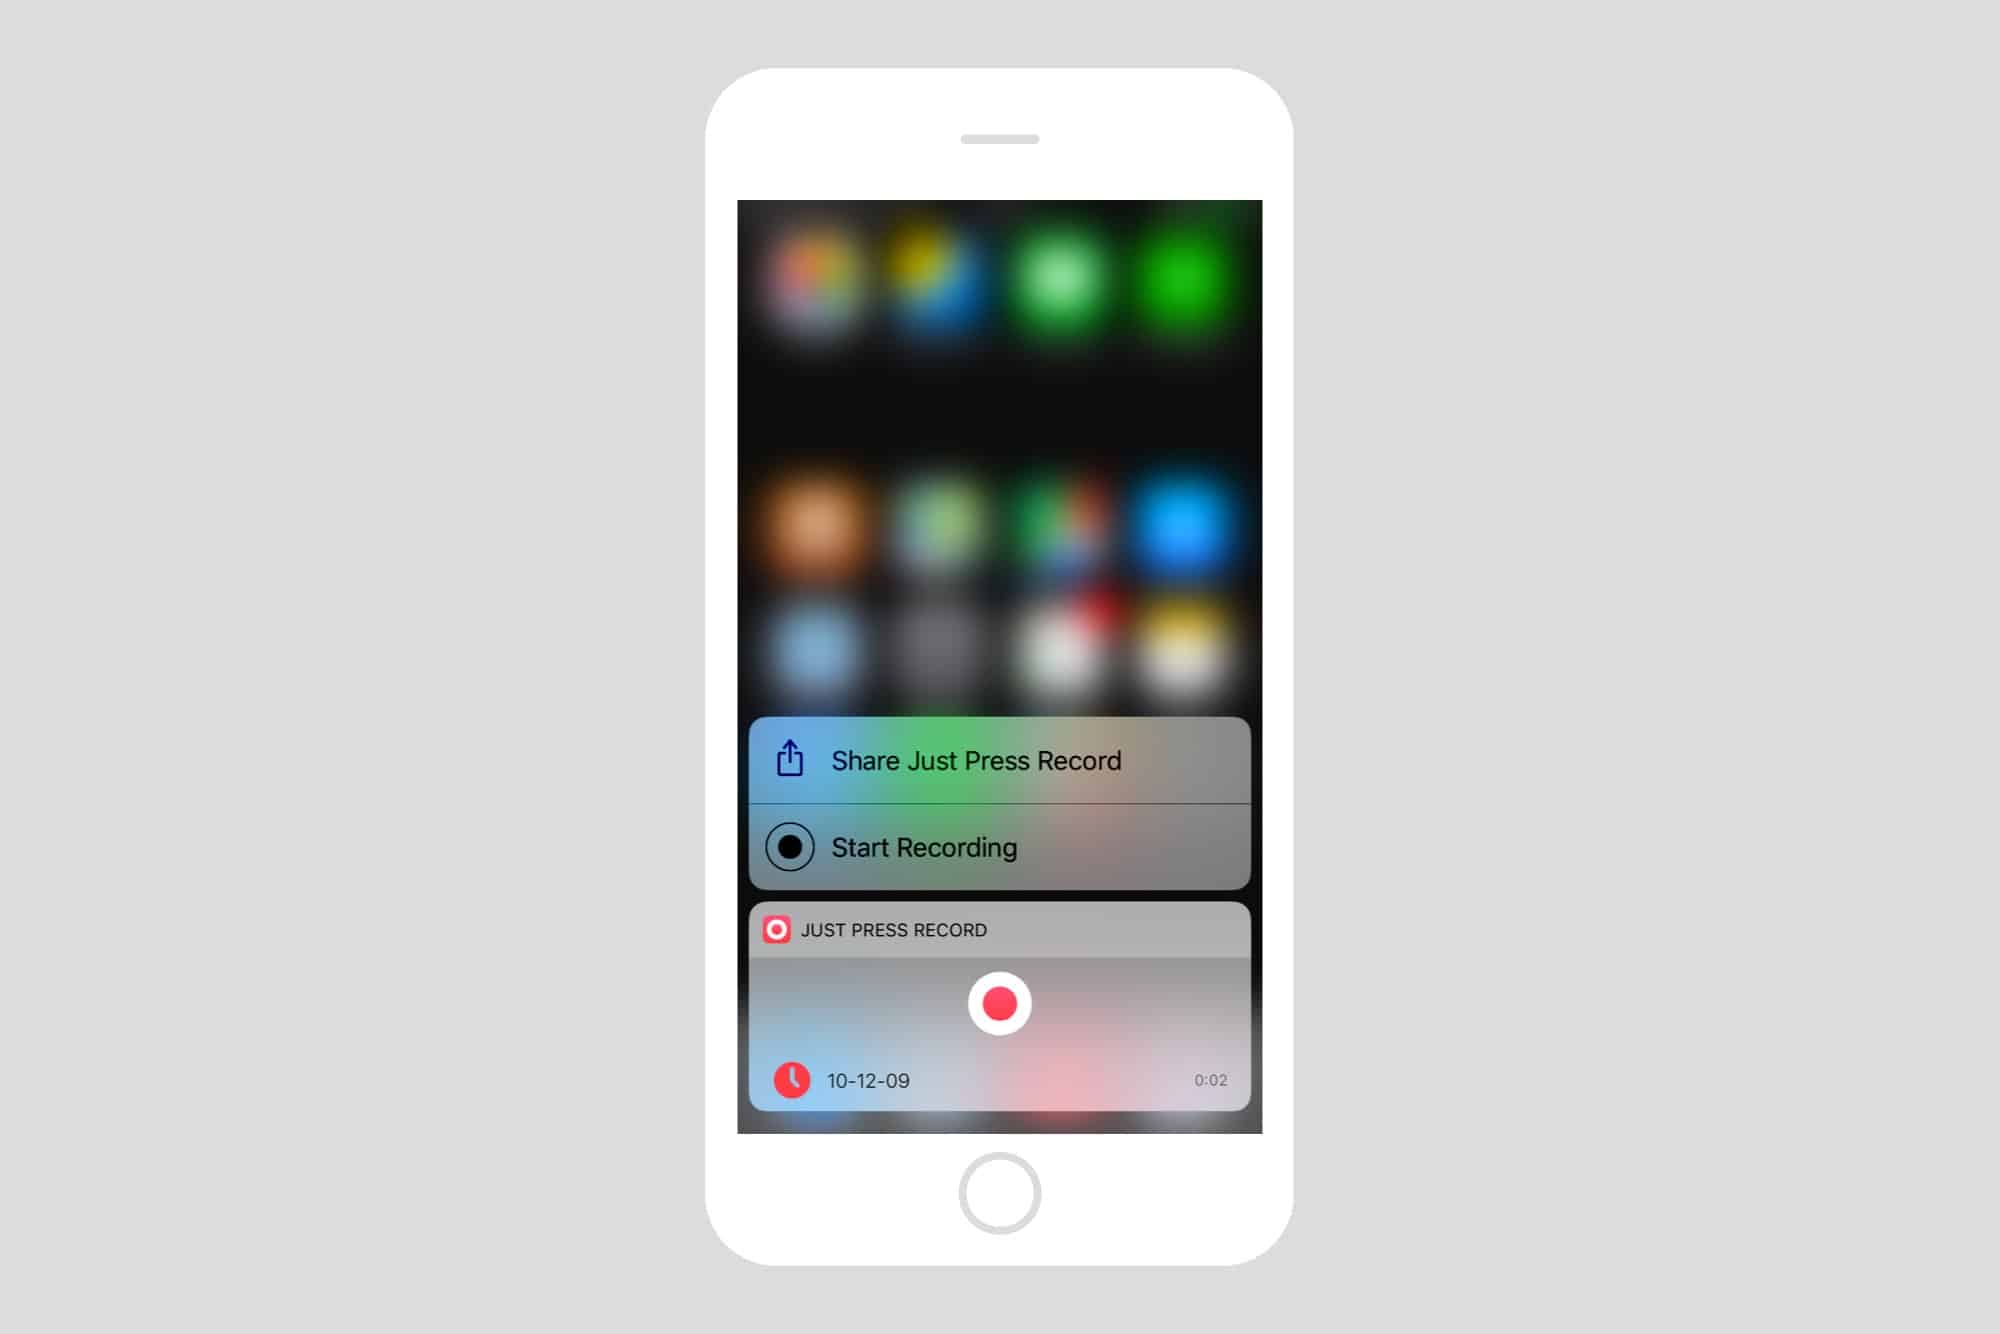 Just Press Record lets you record using 3D Touch.